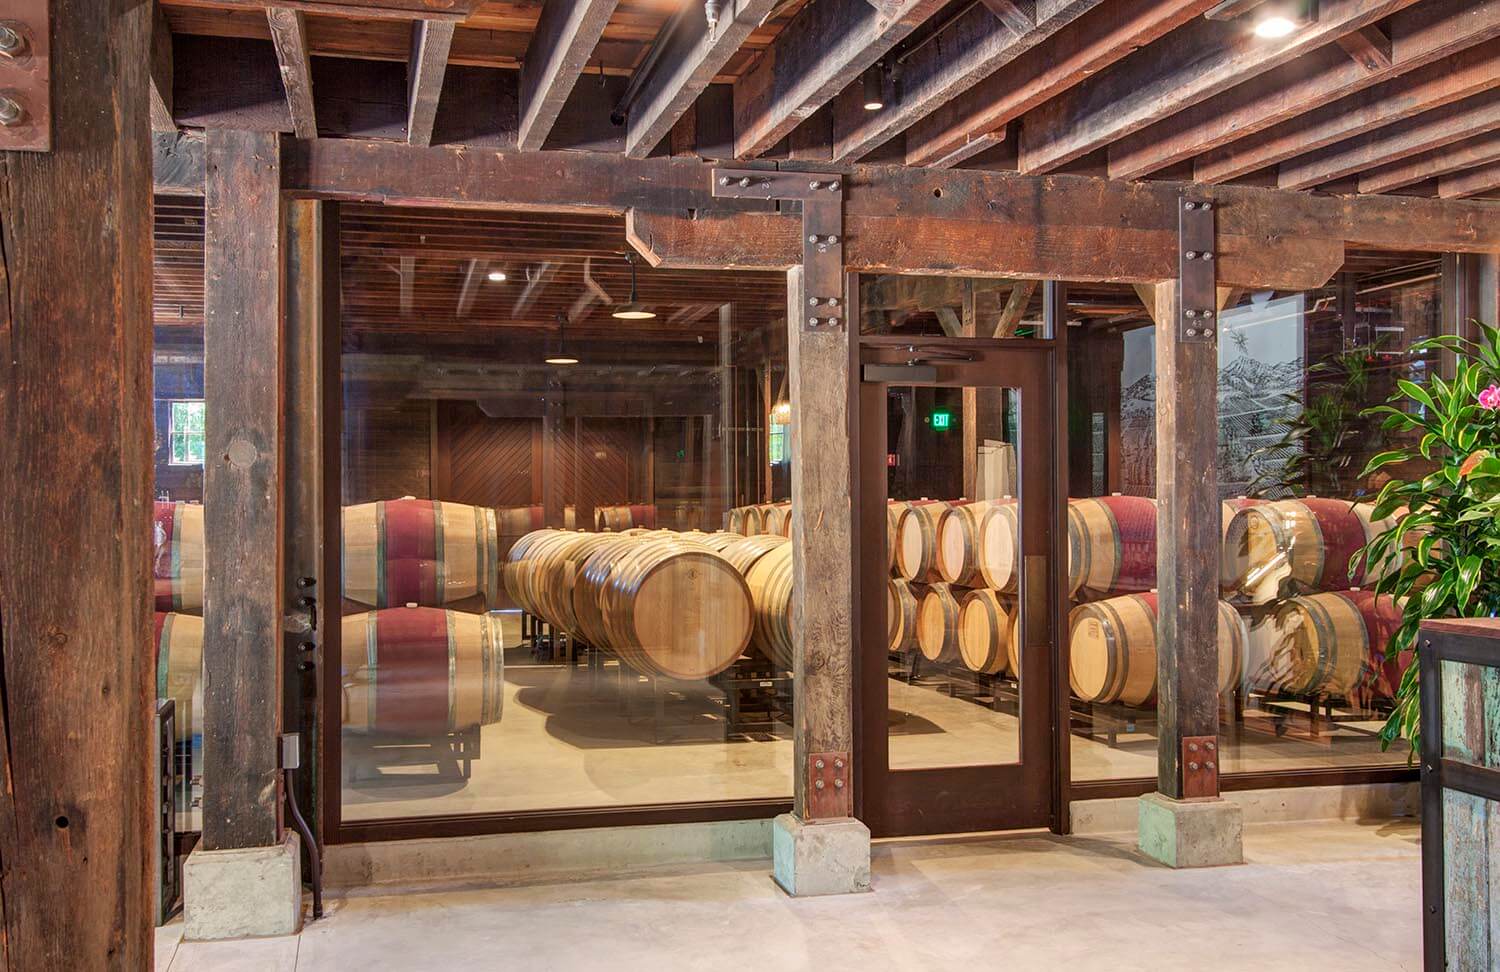 Interior view of wine barrel storage room behind glass walls and closed, glass door